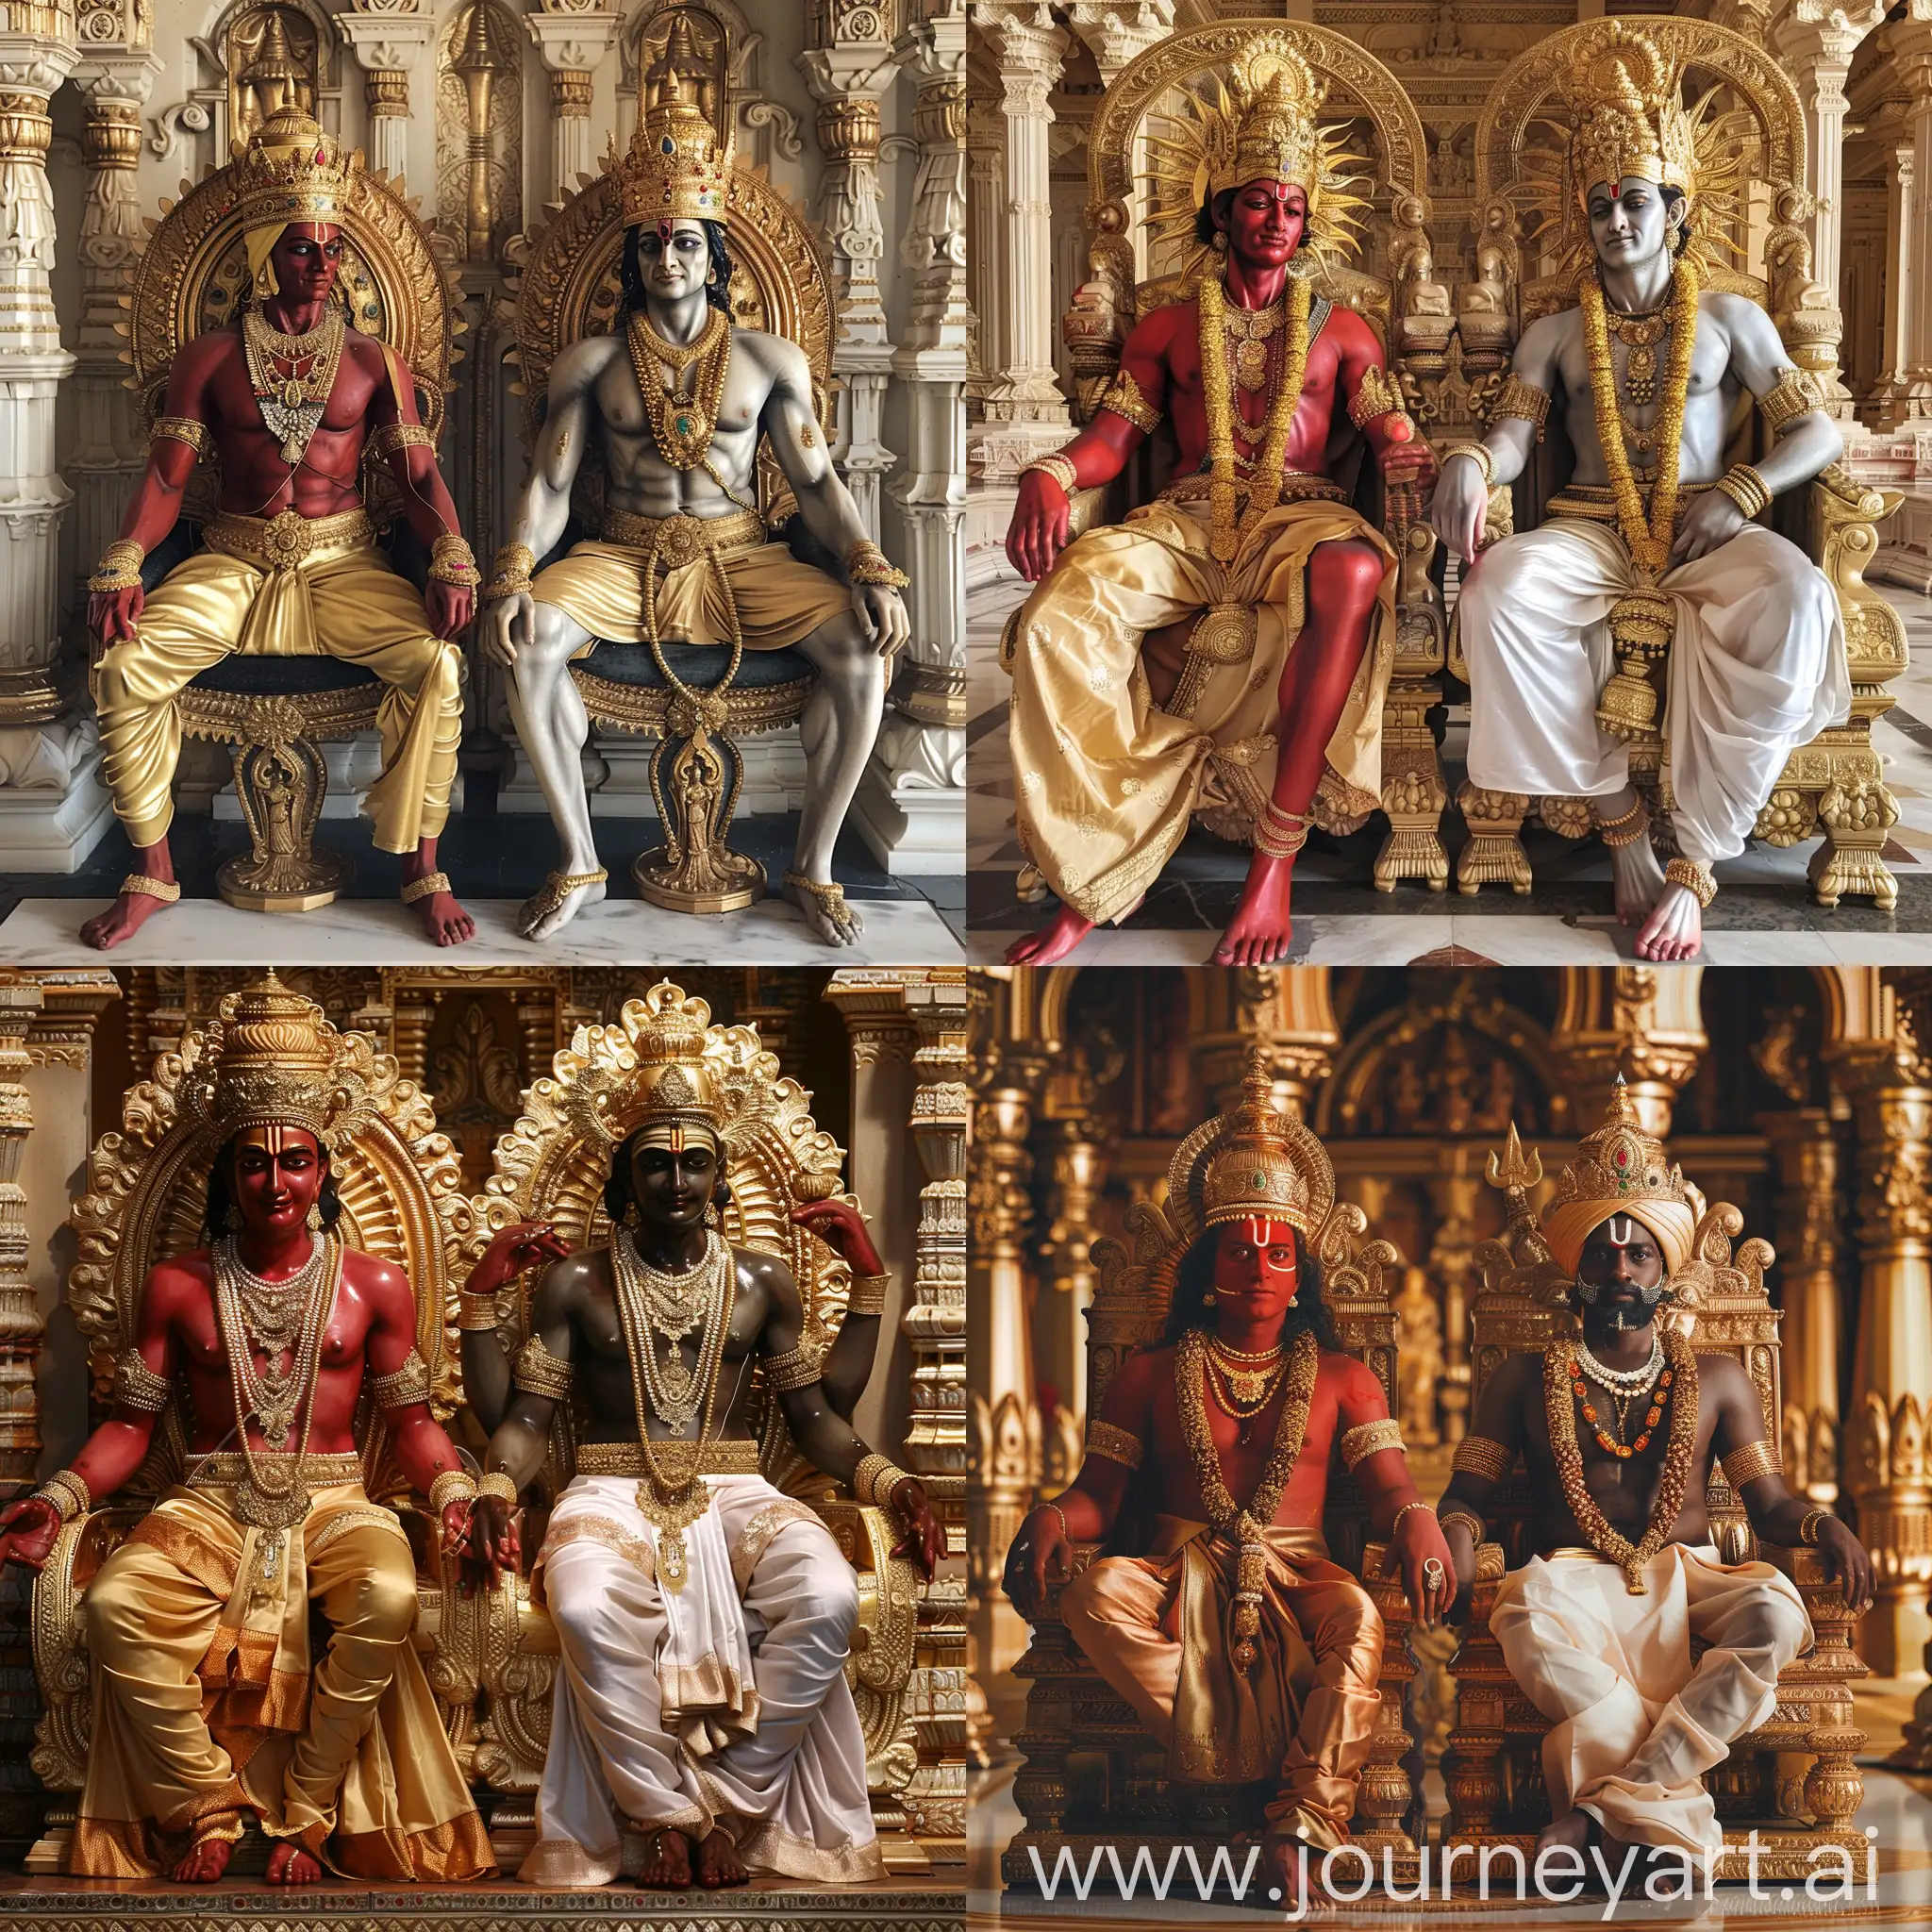 Two Hindu gods are sitting on their imperial thrones next to each other:

At left, there is the Sun god Surya in red skin, he has a golden Hindu crown, clothes and pants.

At right, there is the Moon god Chandra in dark white skin, he has a golden Hindu crown, clothes and pants.

They are both inside a splendid Hindu temple.